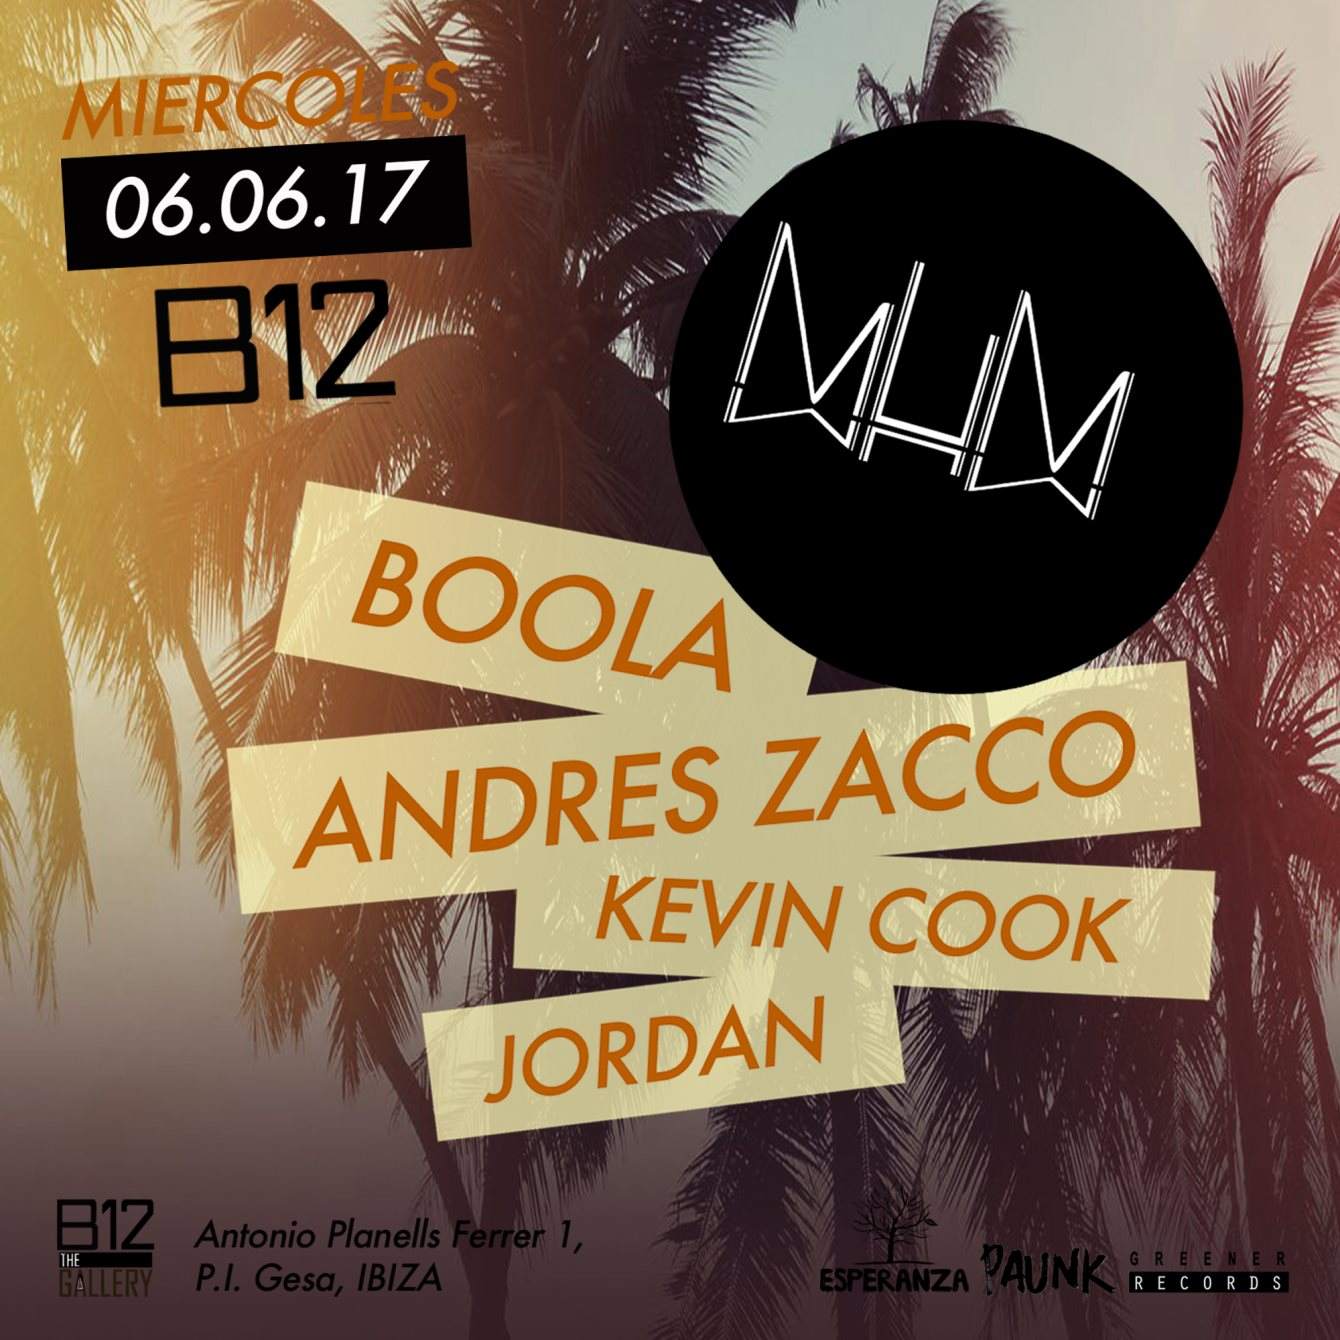 MuM Special Night with Boola, Andres Zacco, Kevin Cook & Jordan - Página frontal